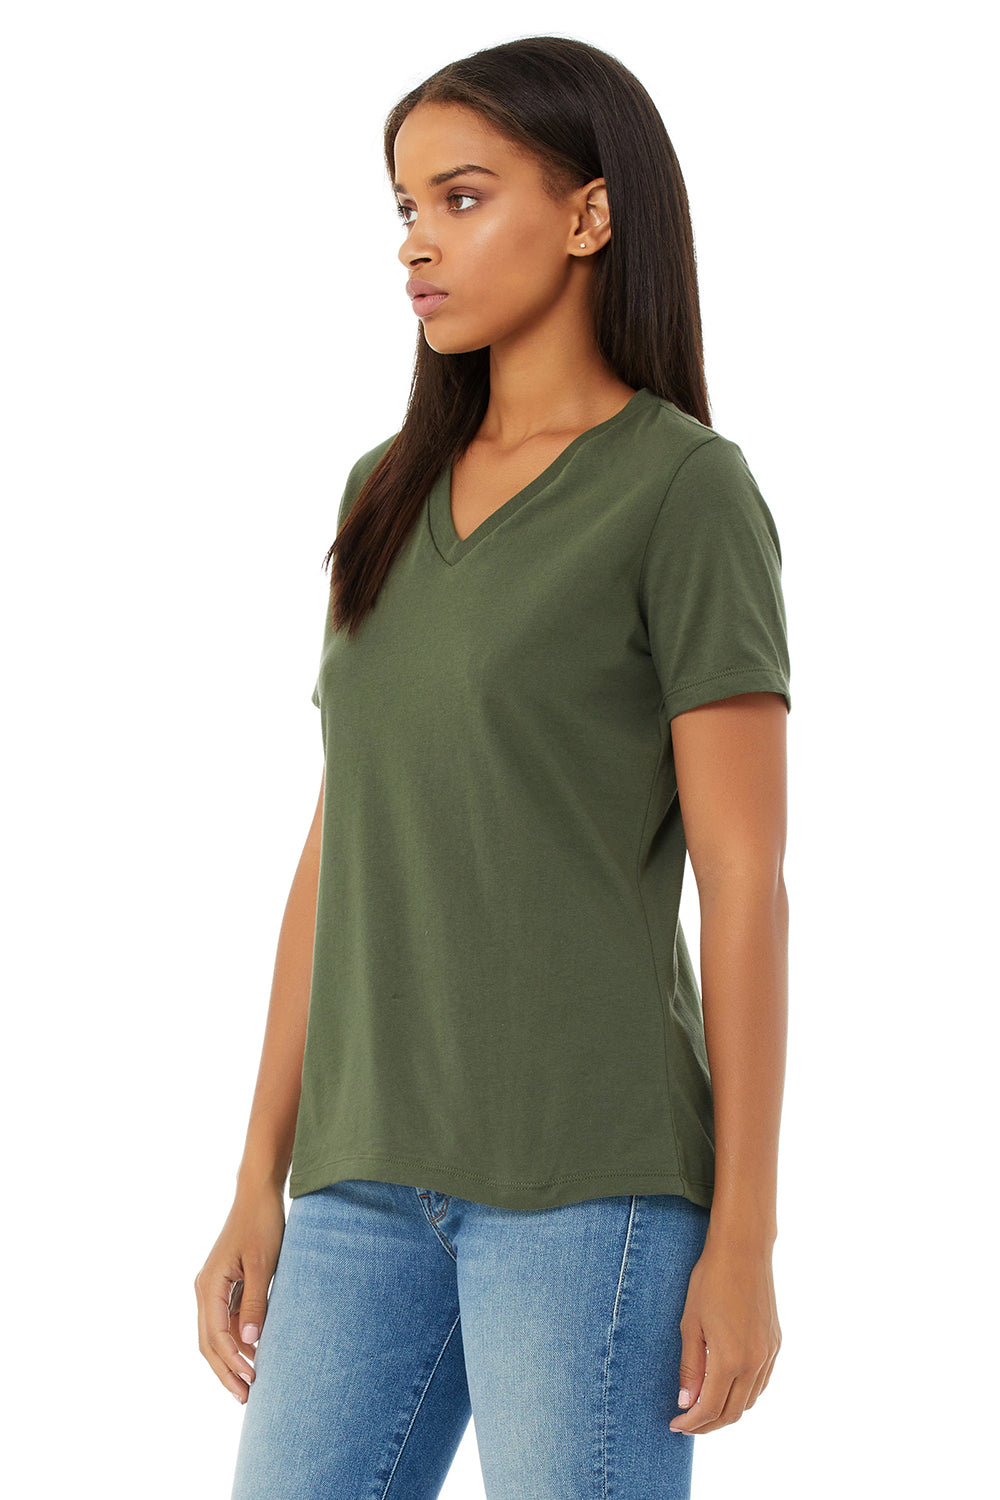 Bella + Canvas BC6405/6405 Womens Relaxed Jersey Short Sleeve V-Neck T-Shirt Military Green Model 3Q